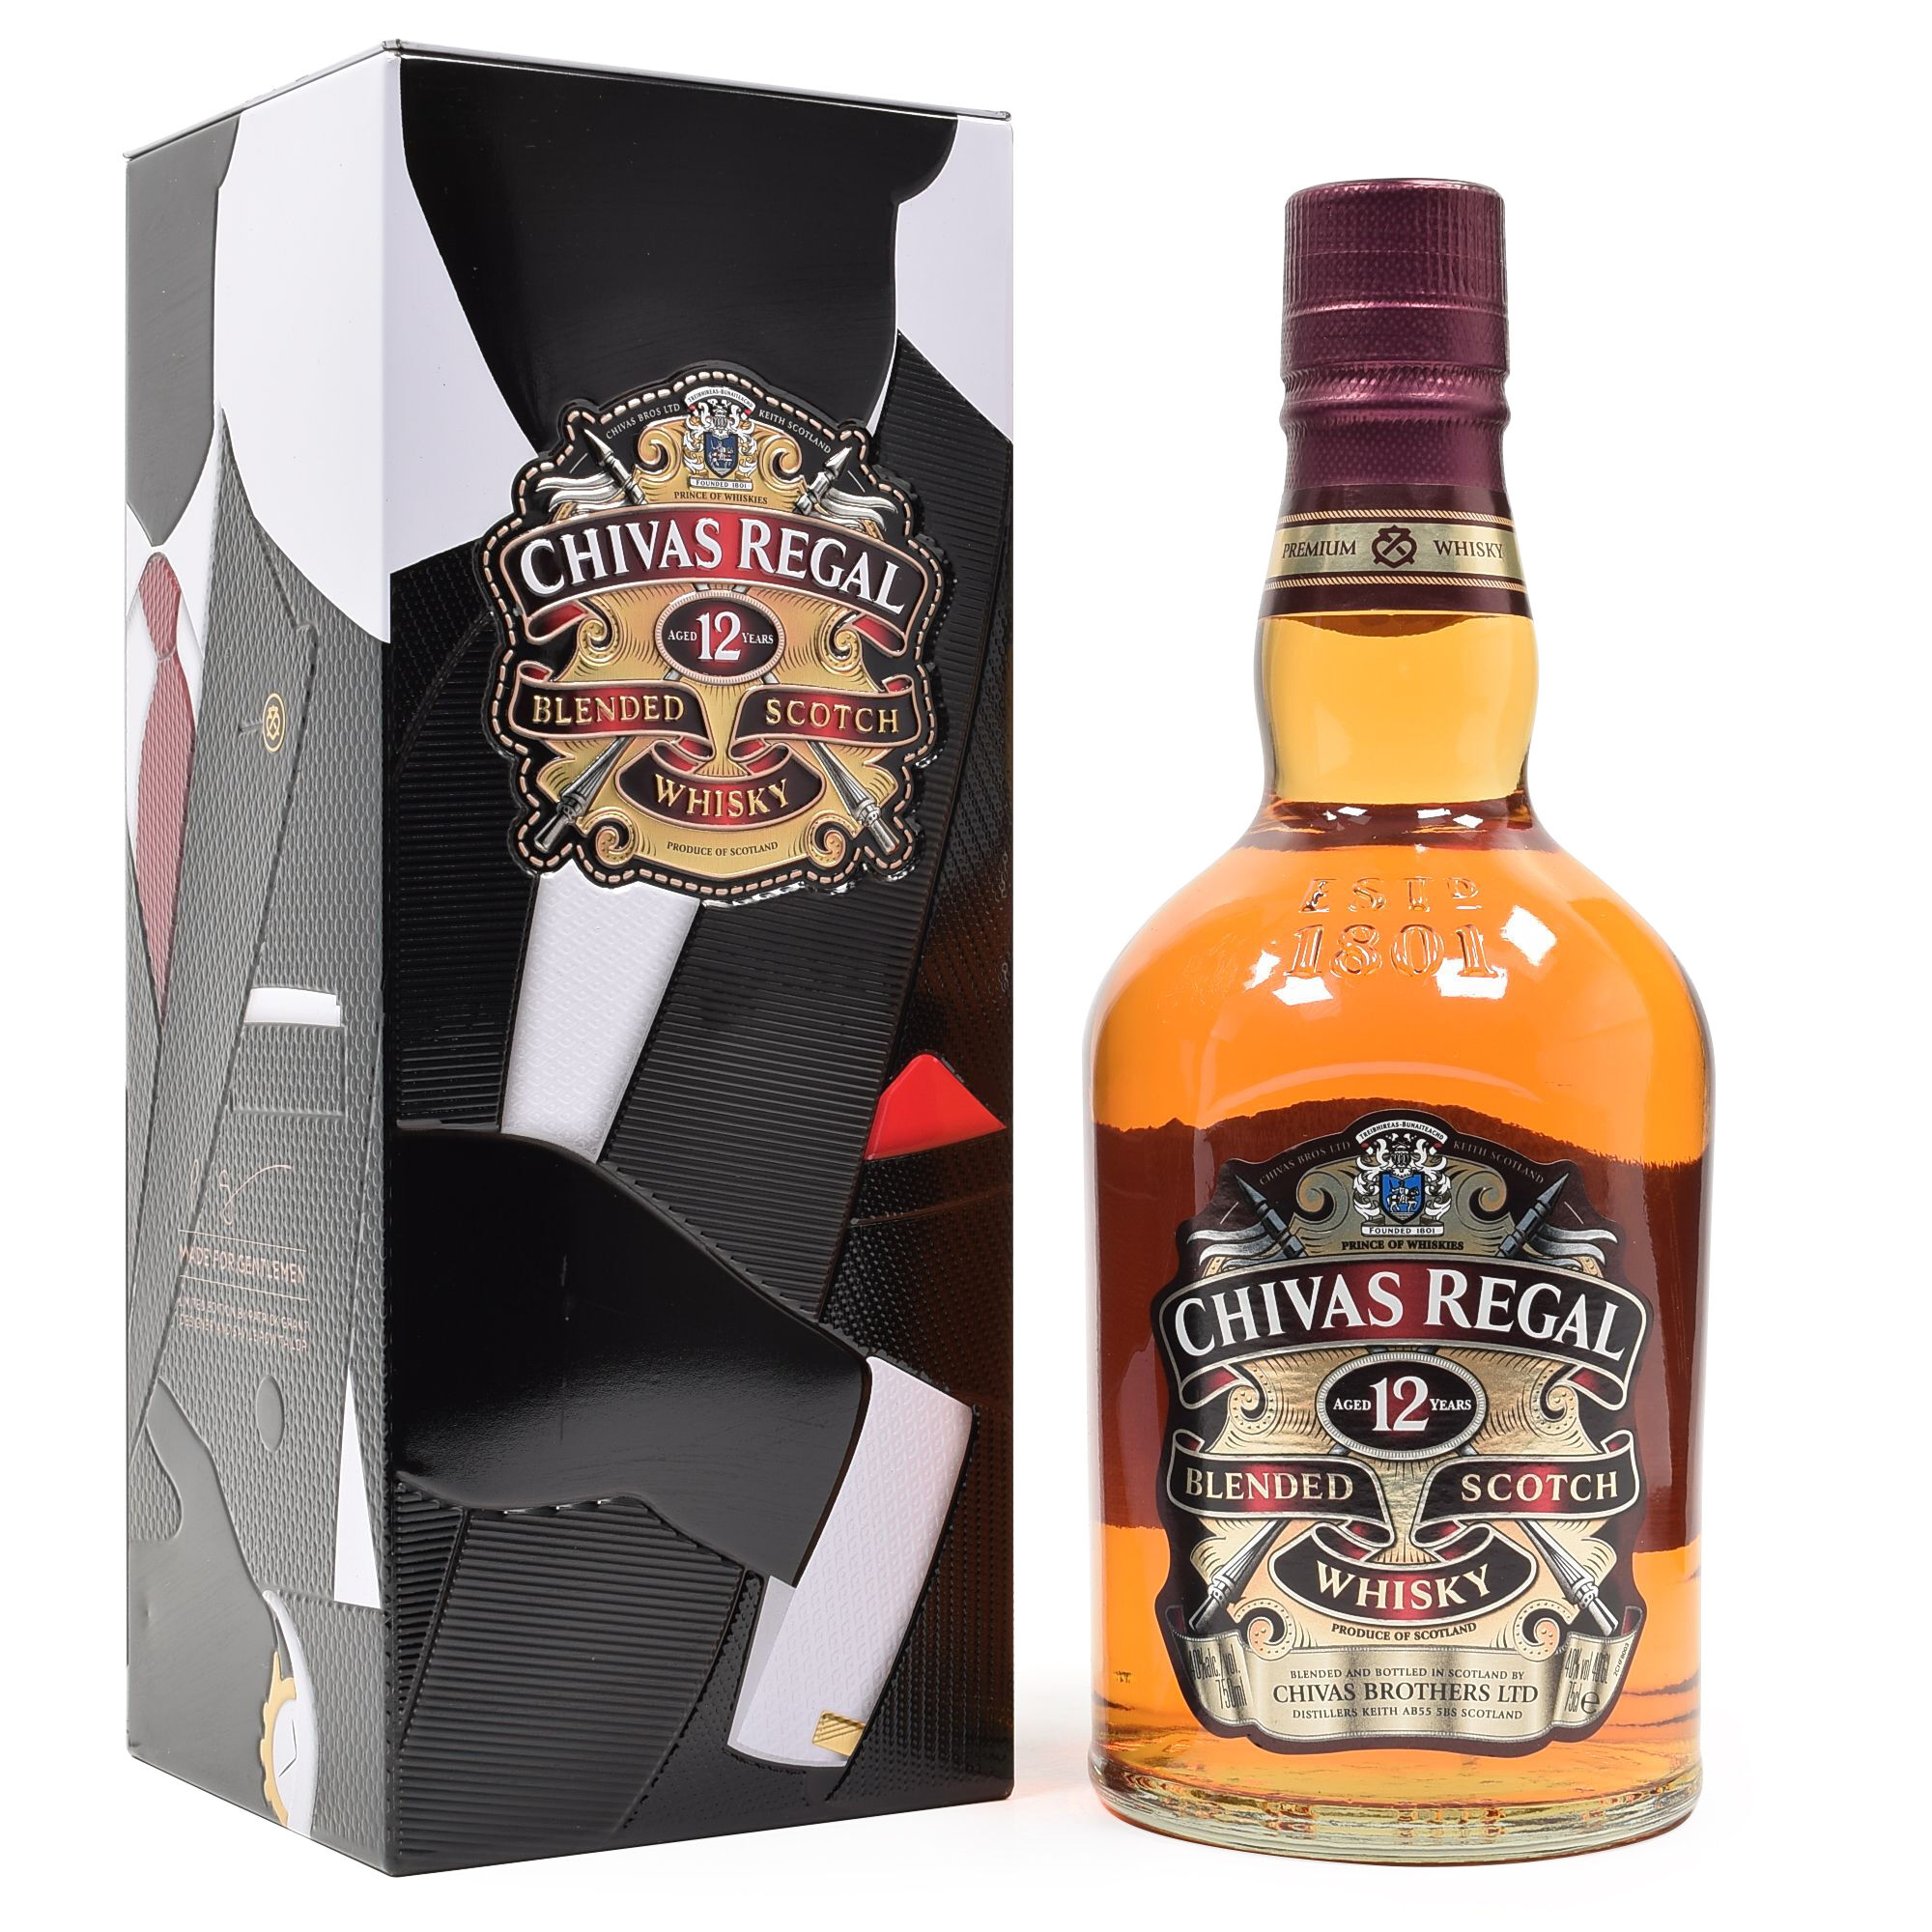 Chivas Regal 12 Year Old Blended Scotch Whisky 'Made for Gentleman' Box,  Scotland